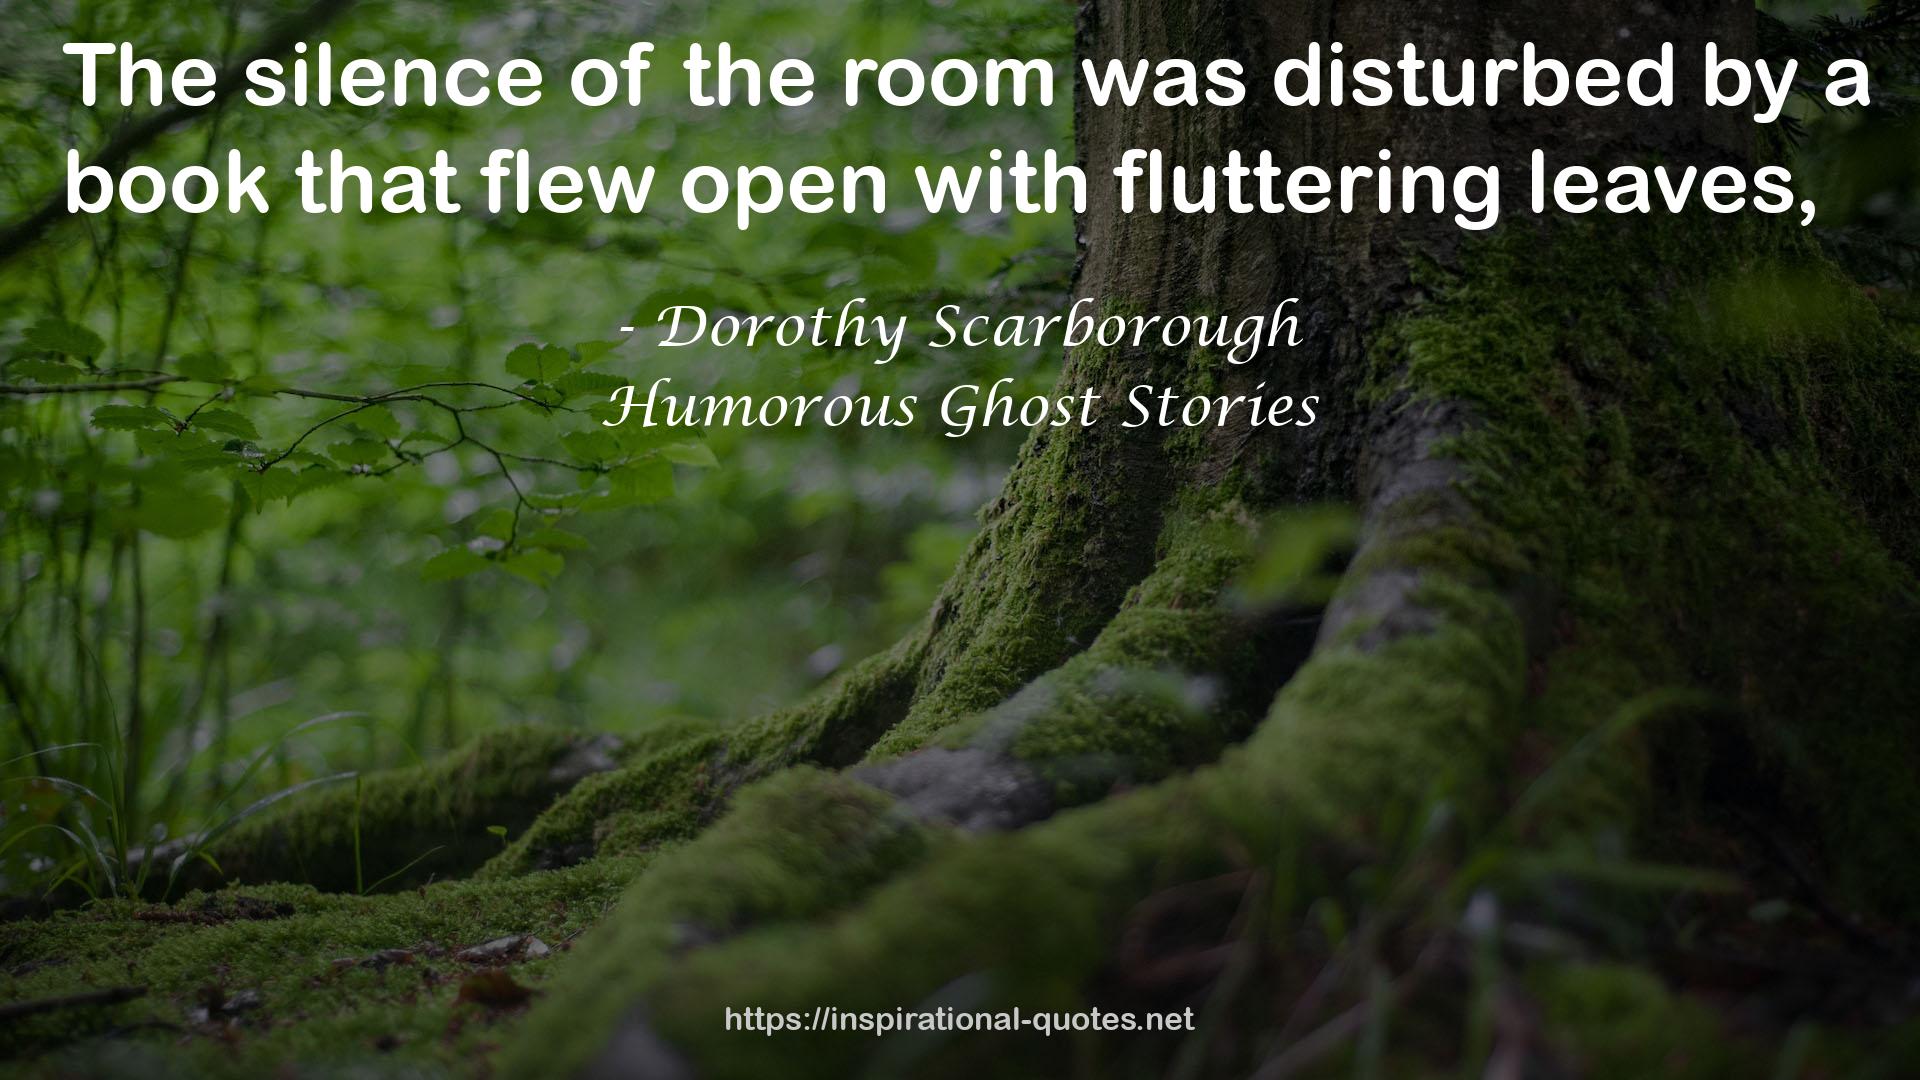 Humorous Ghost Stories QUOTES